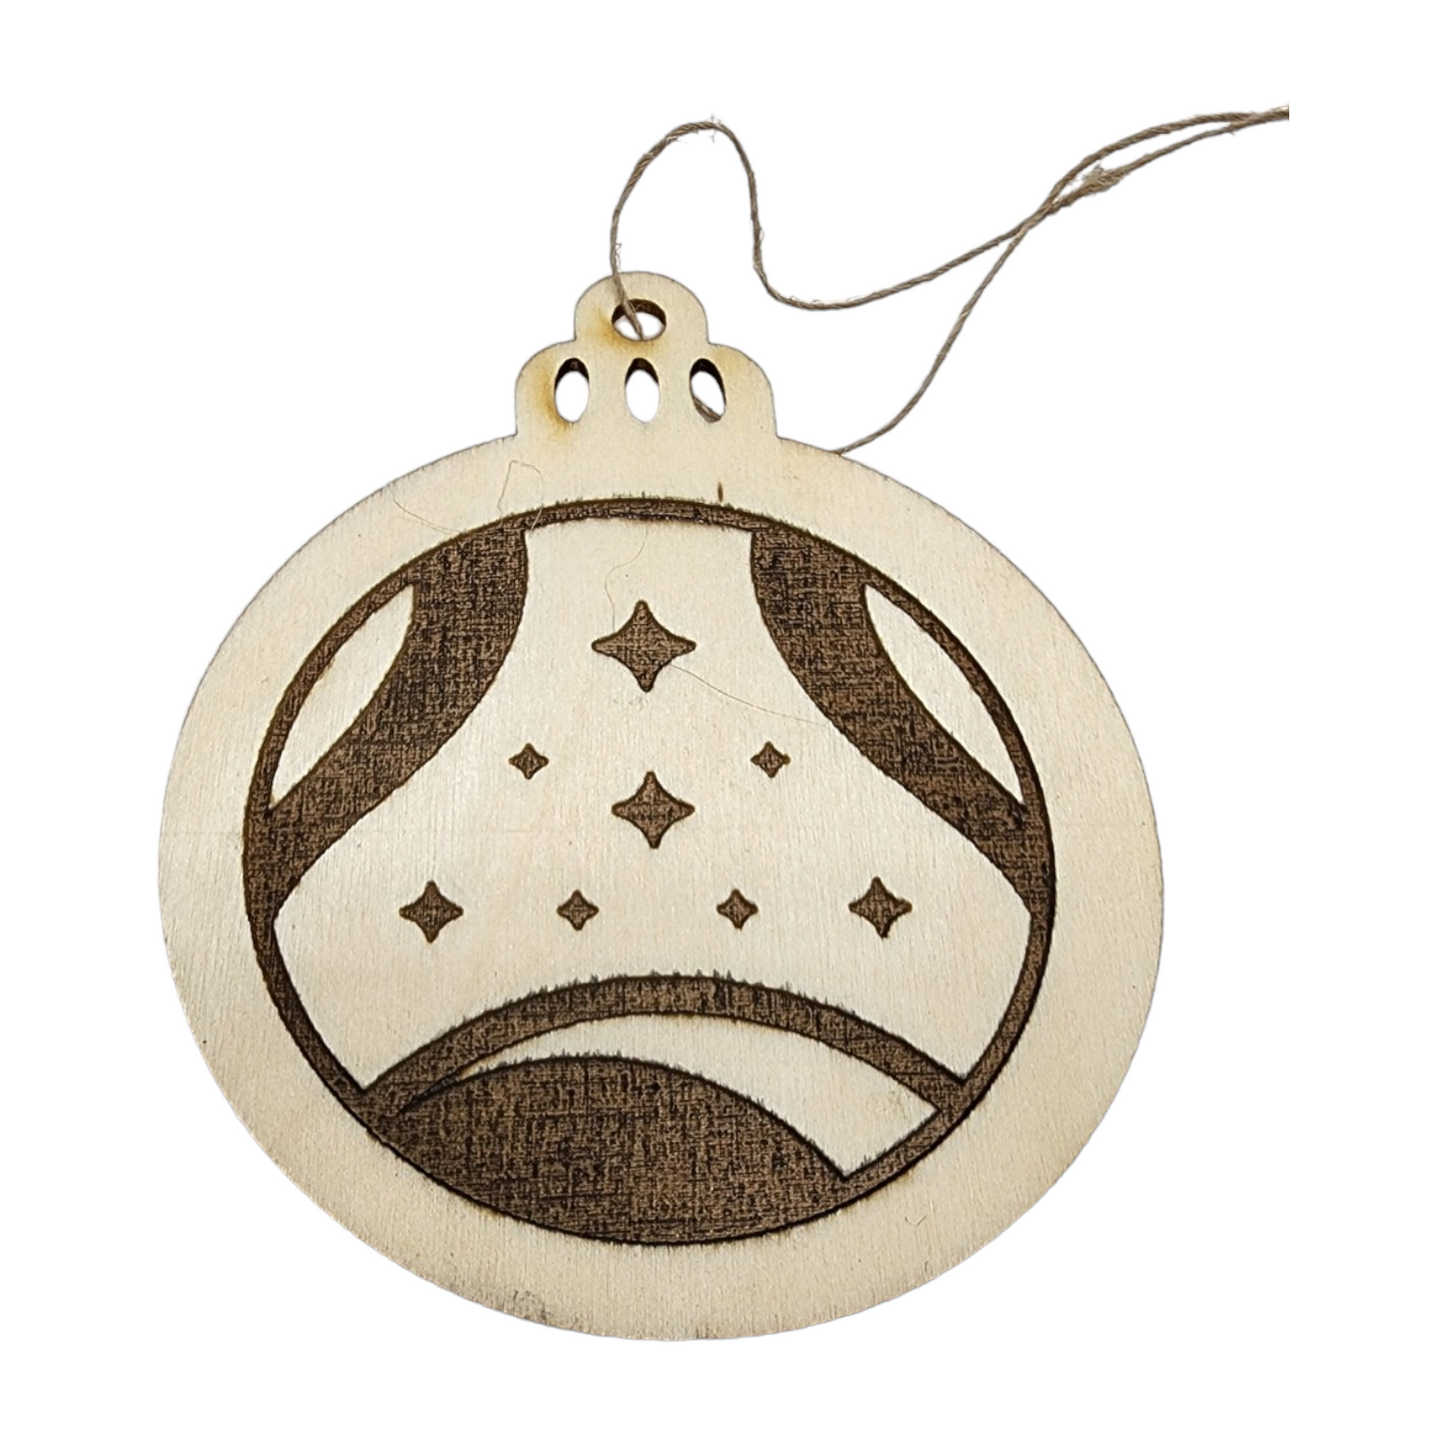 Starfield Constellation Faction Wooden Ornament with Unfinished Engrave Design